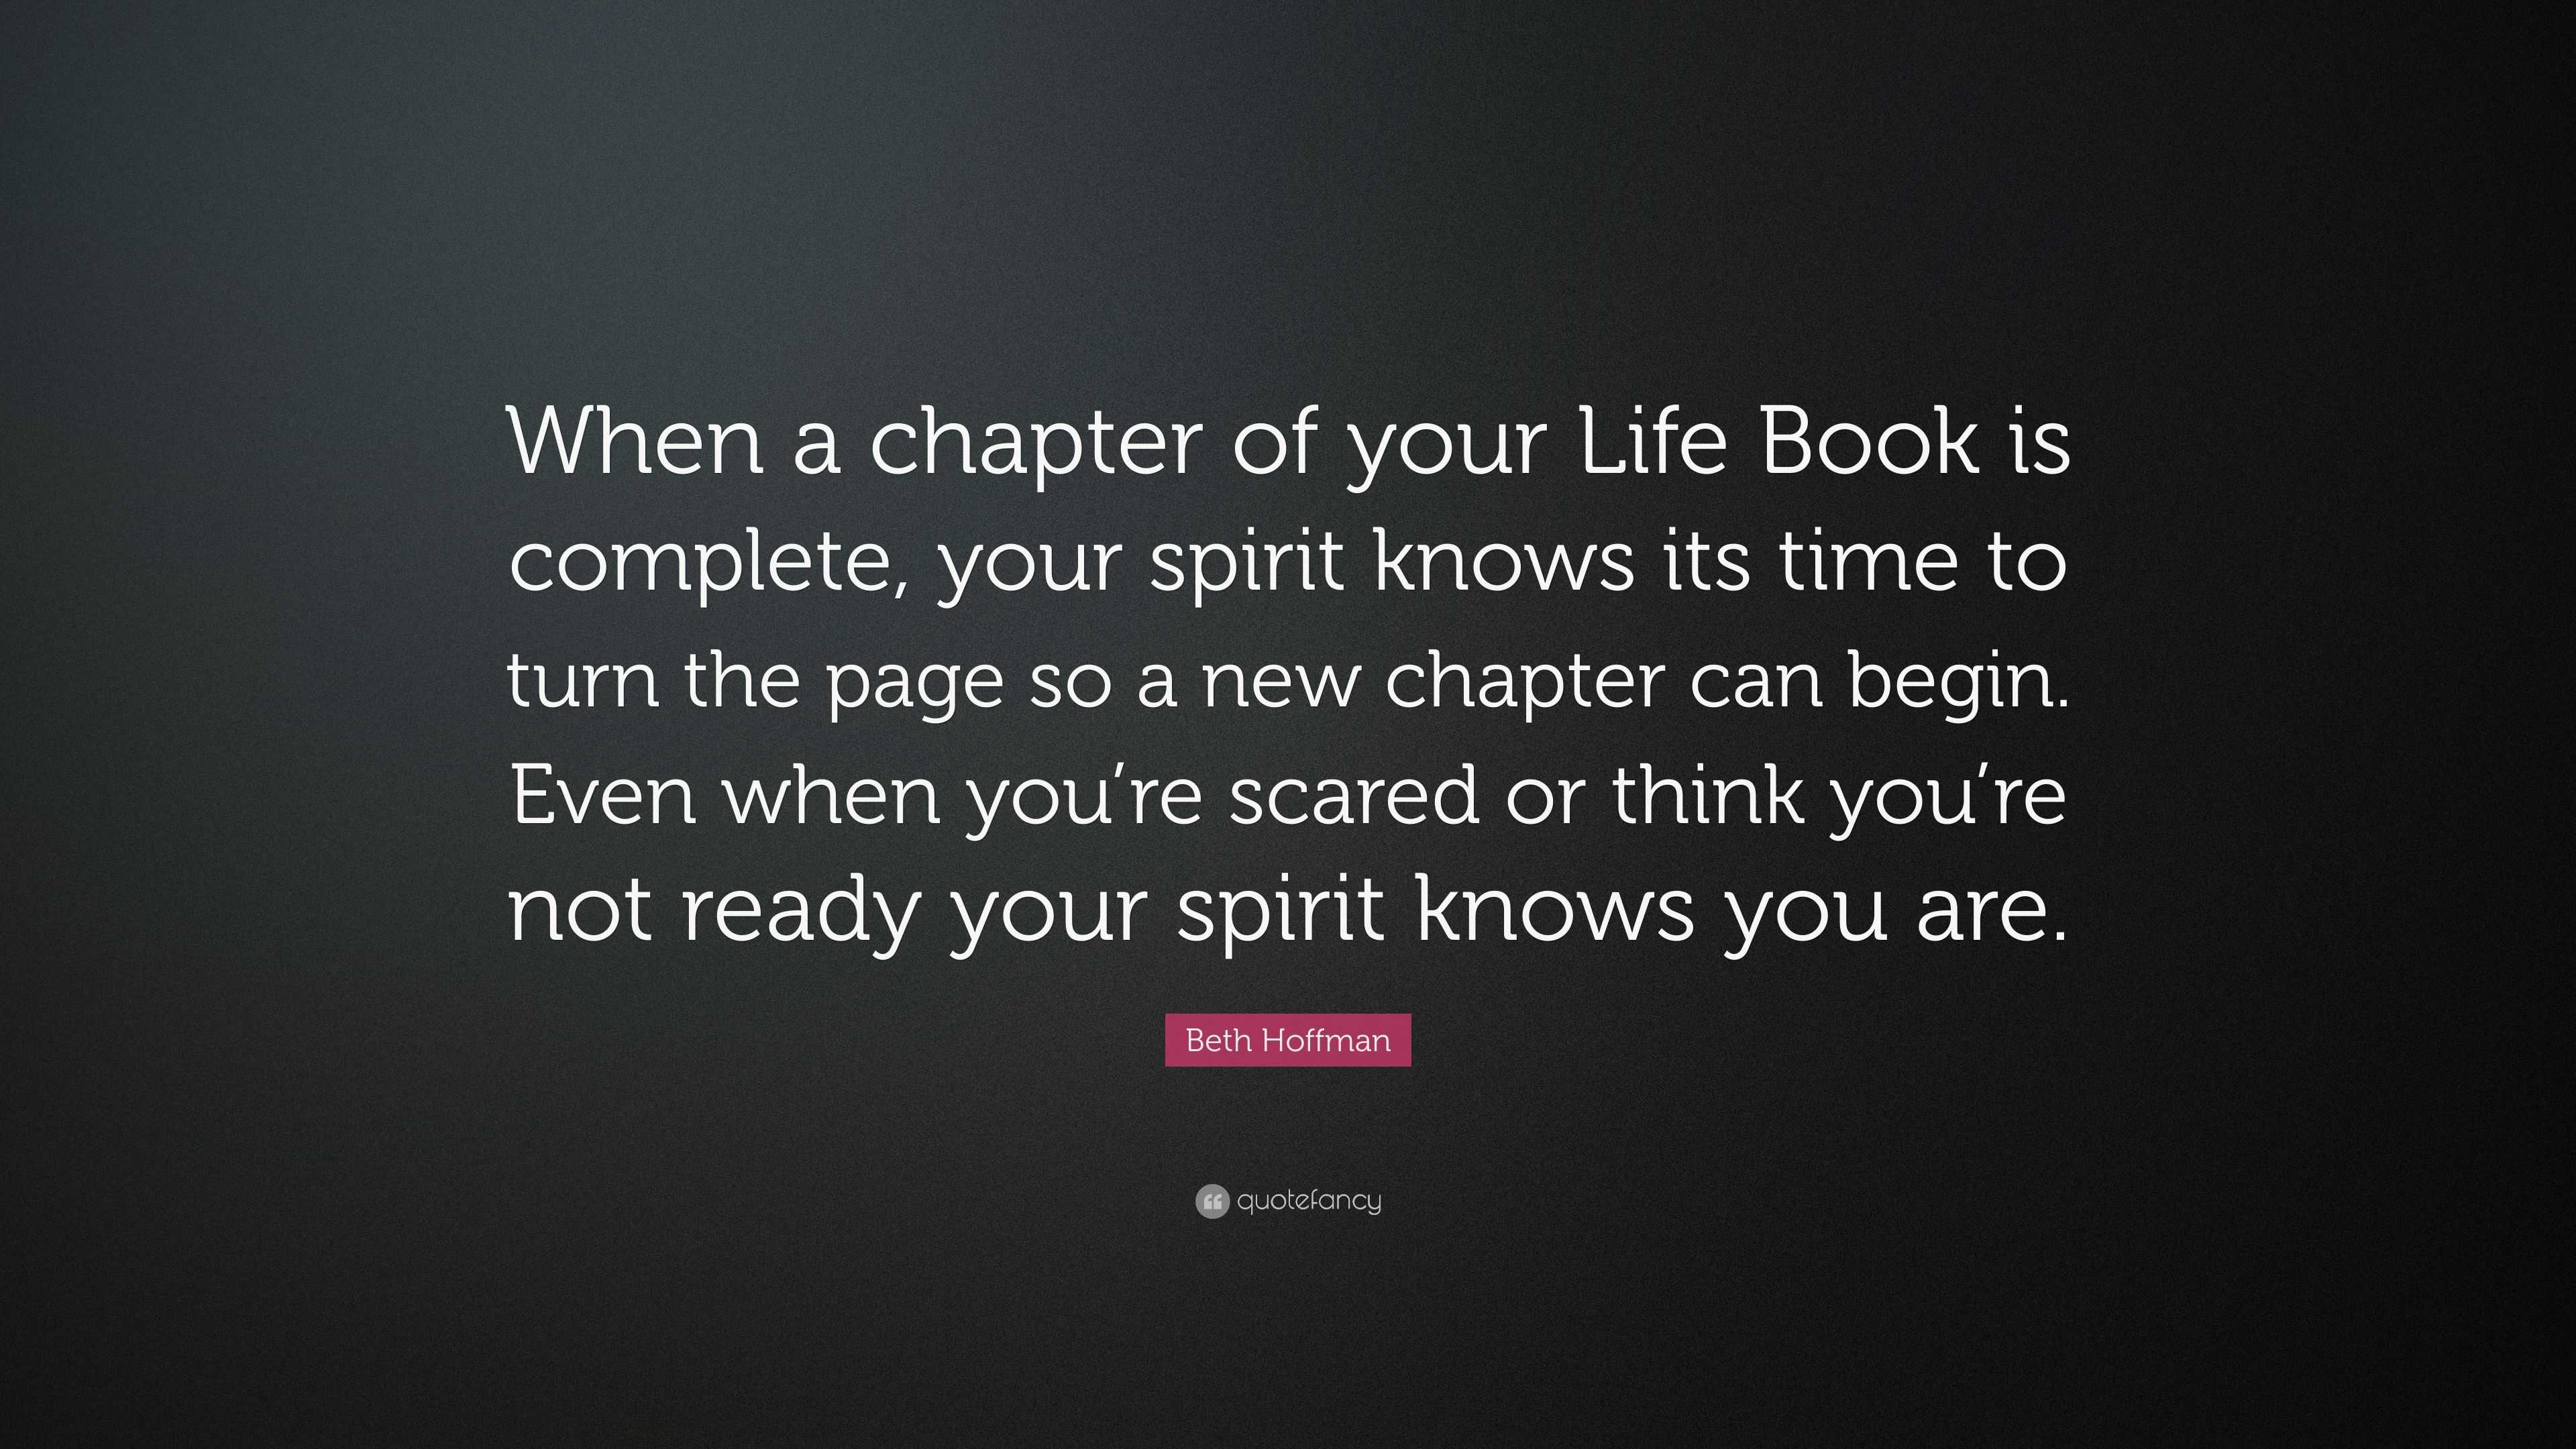 Beth Hoffman Quote “When a chapter of your Life Book is plete your